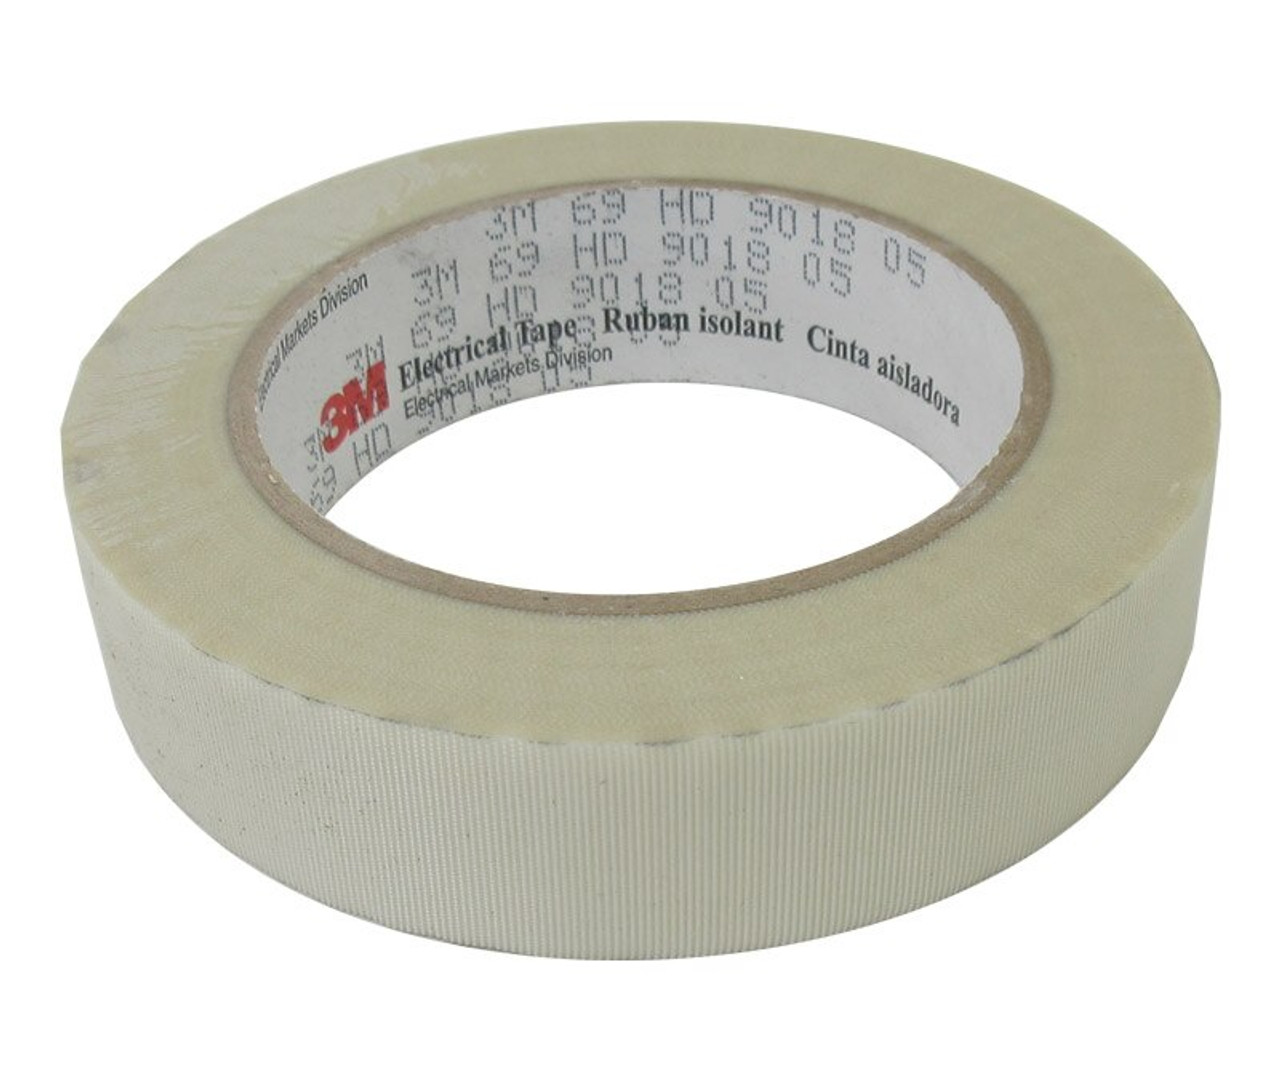 3M 054007-27494 Scotch 69 White 7 Mil Glass Cloth Electrical Tape - 1 x 36  Yard Roll at